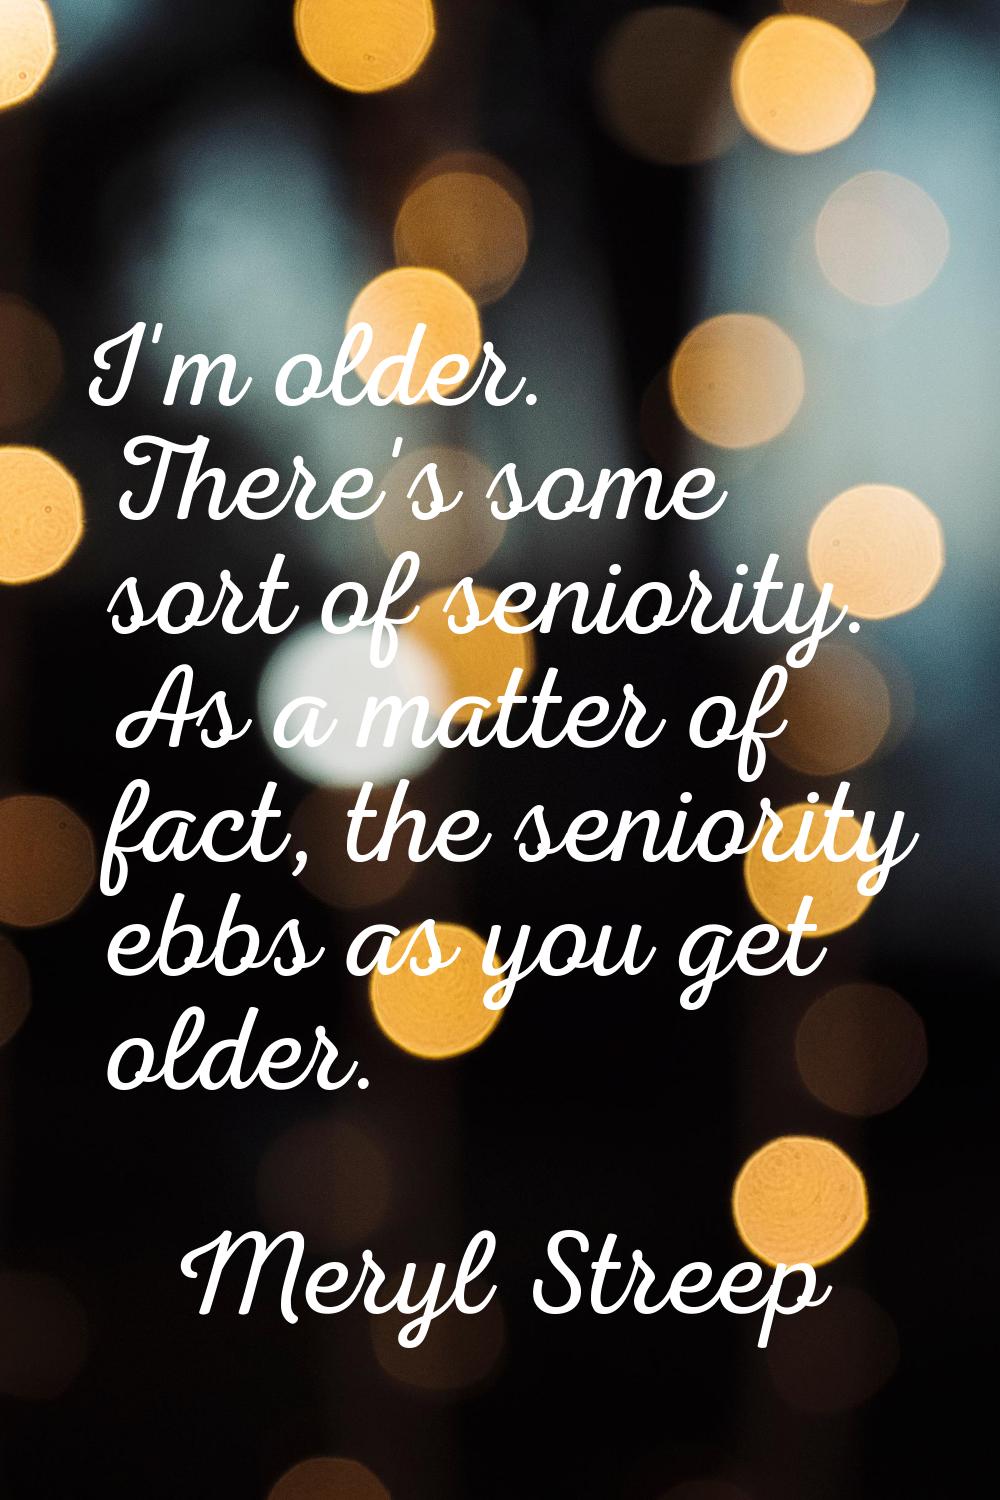 I'm older. There's some sort of seniority. As a matter of fact, the seniority ebbs as you get older